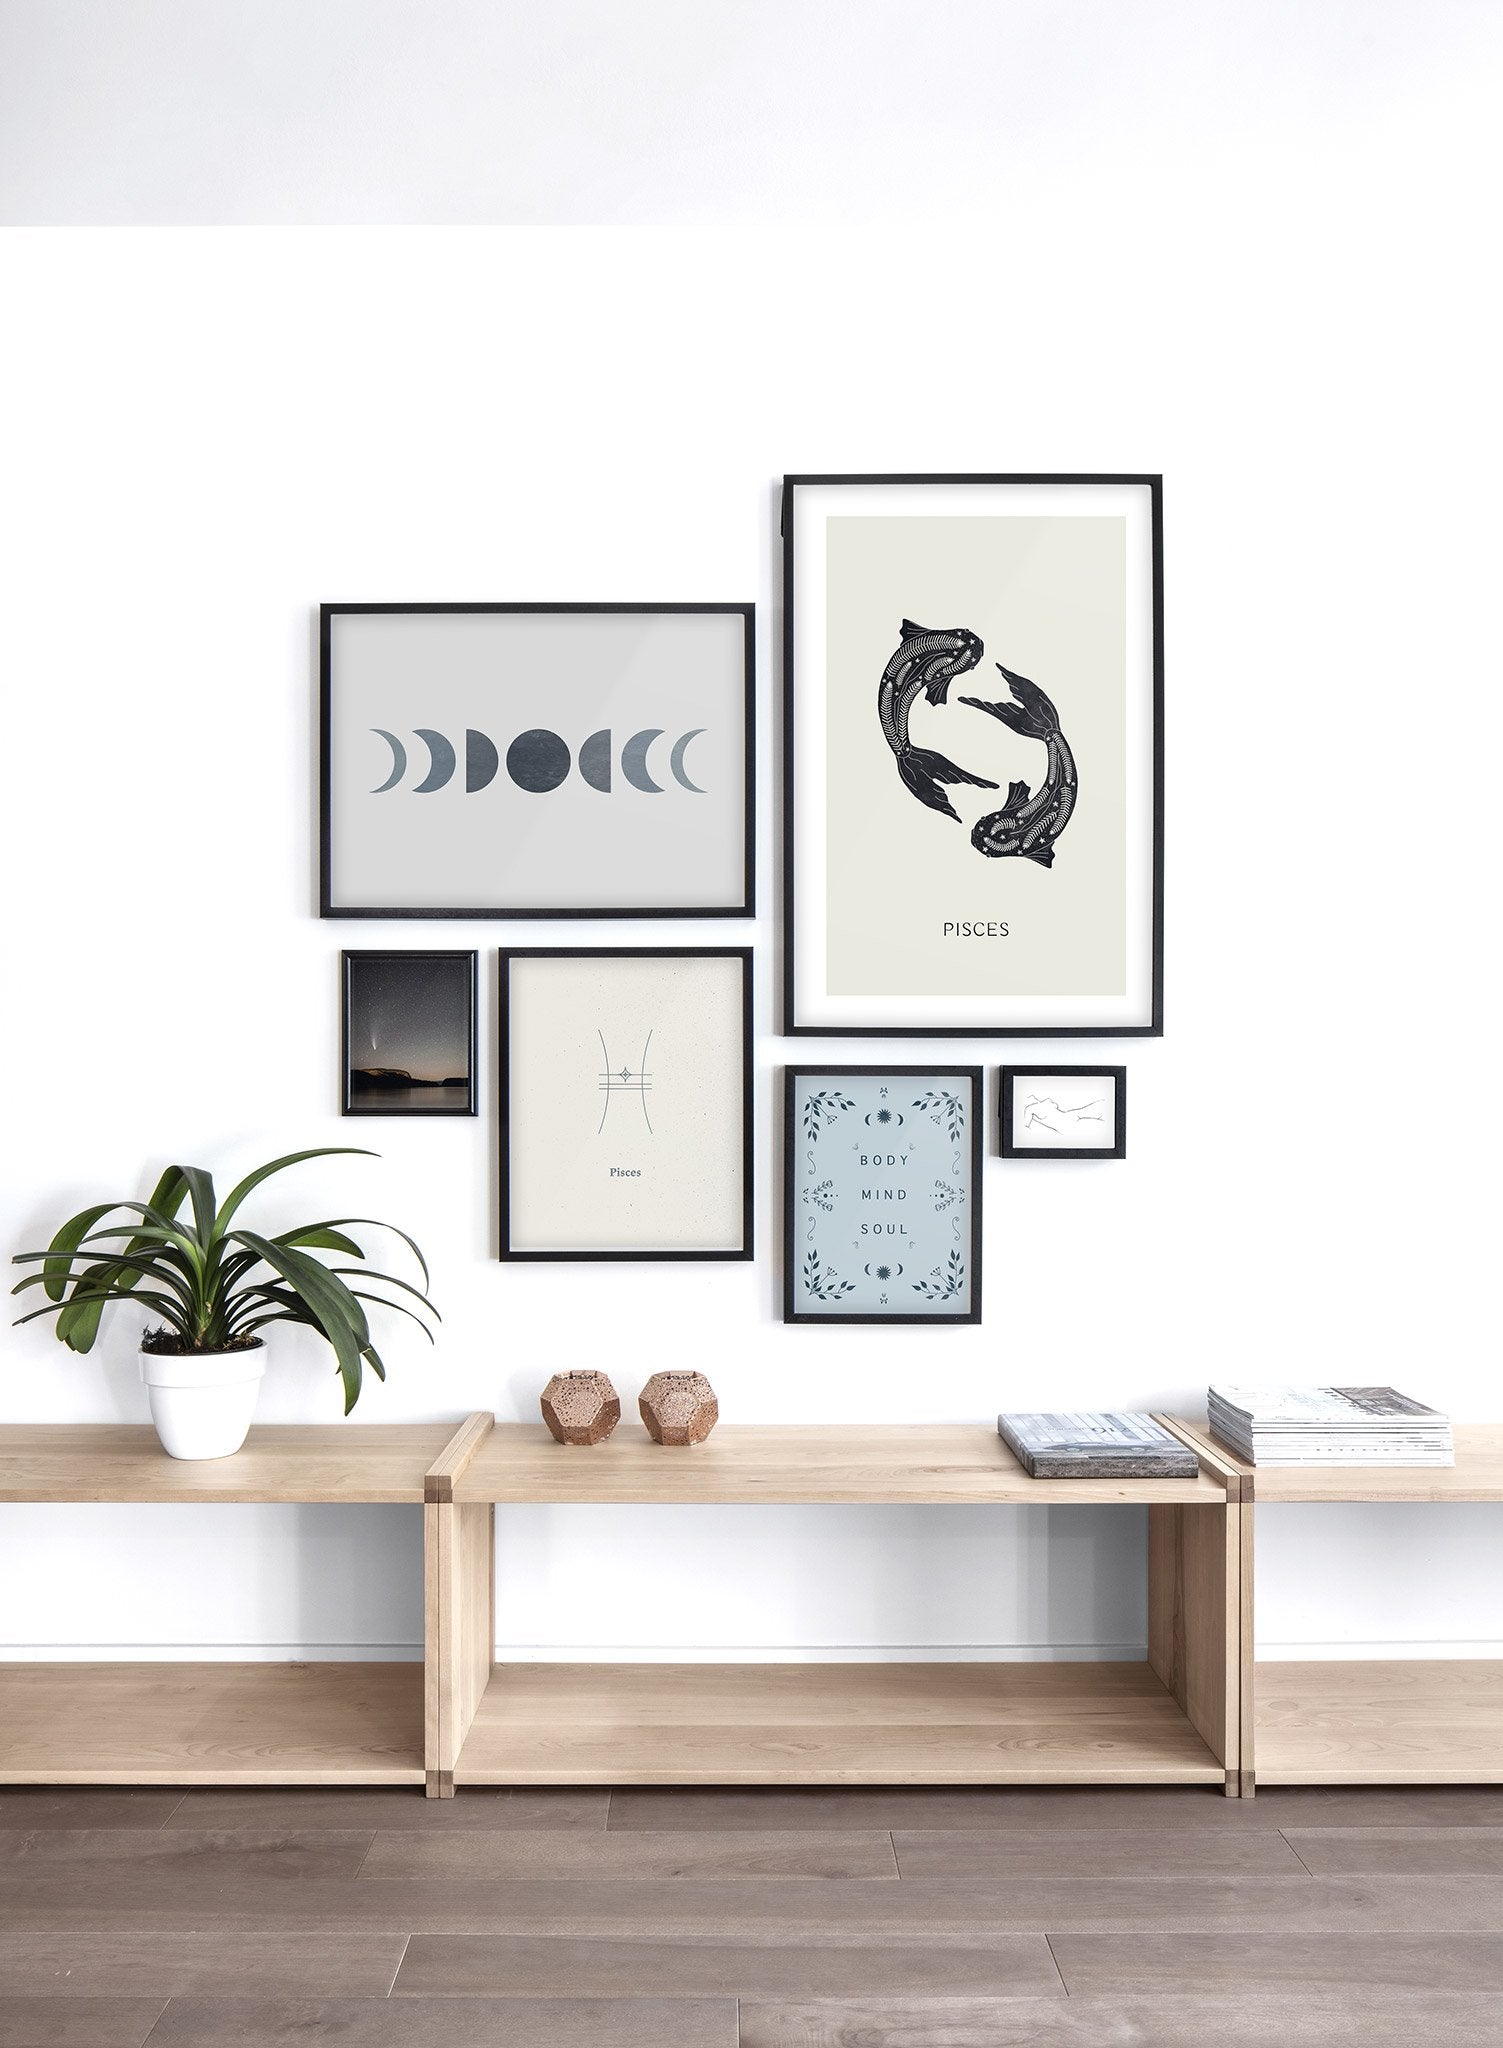 Celestial illustration poster by Opposite Wall with blue moon phases - Lifestyle Gallery - Living Room